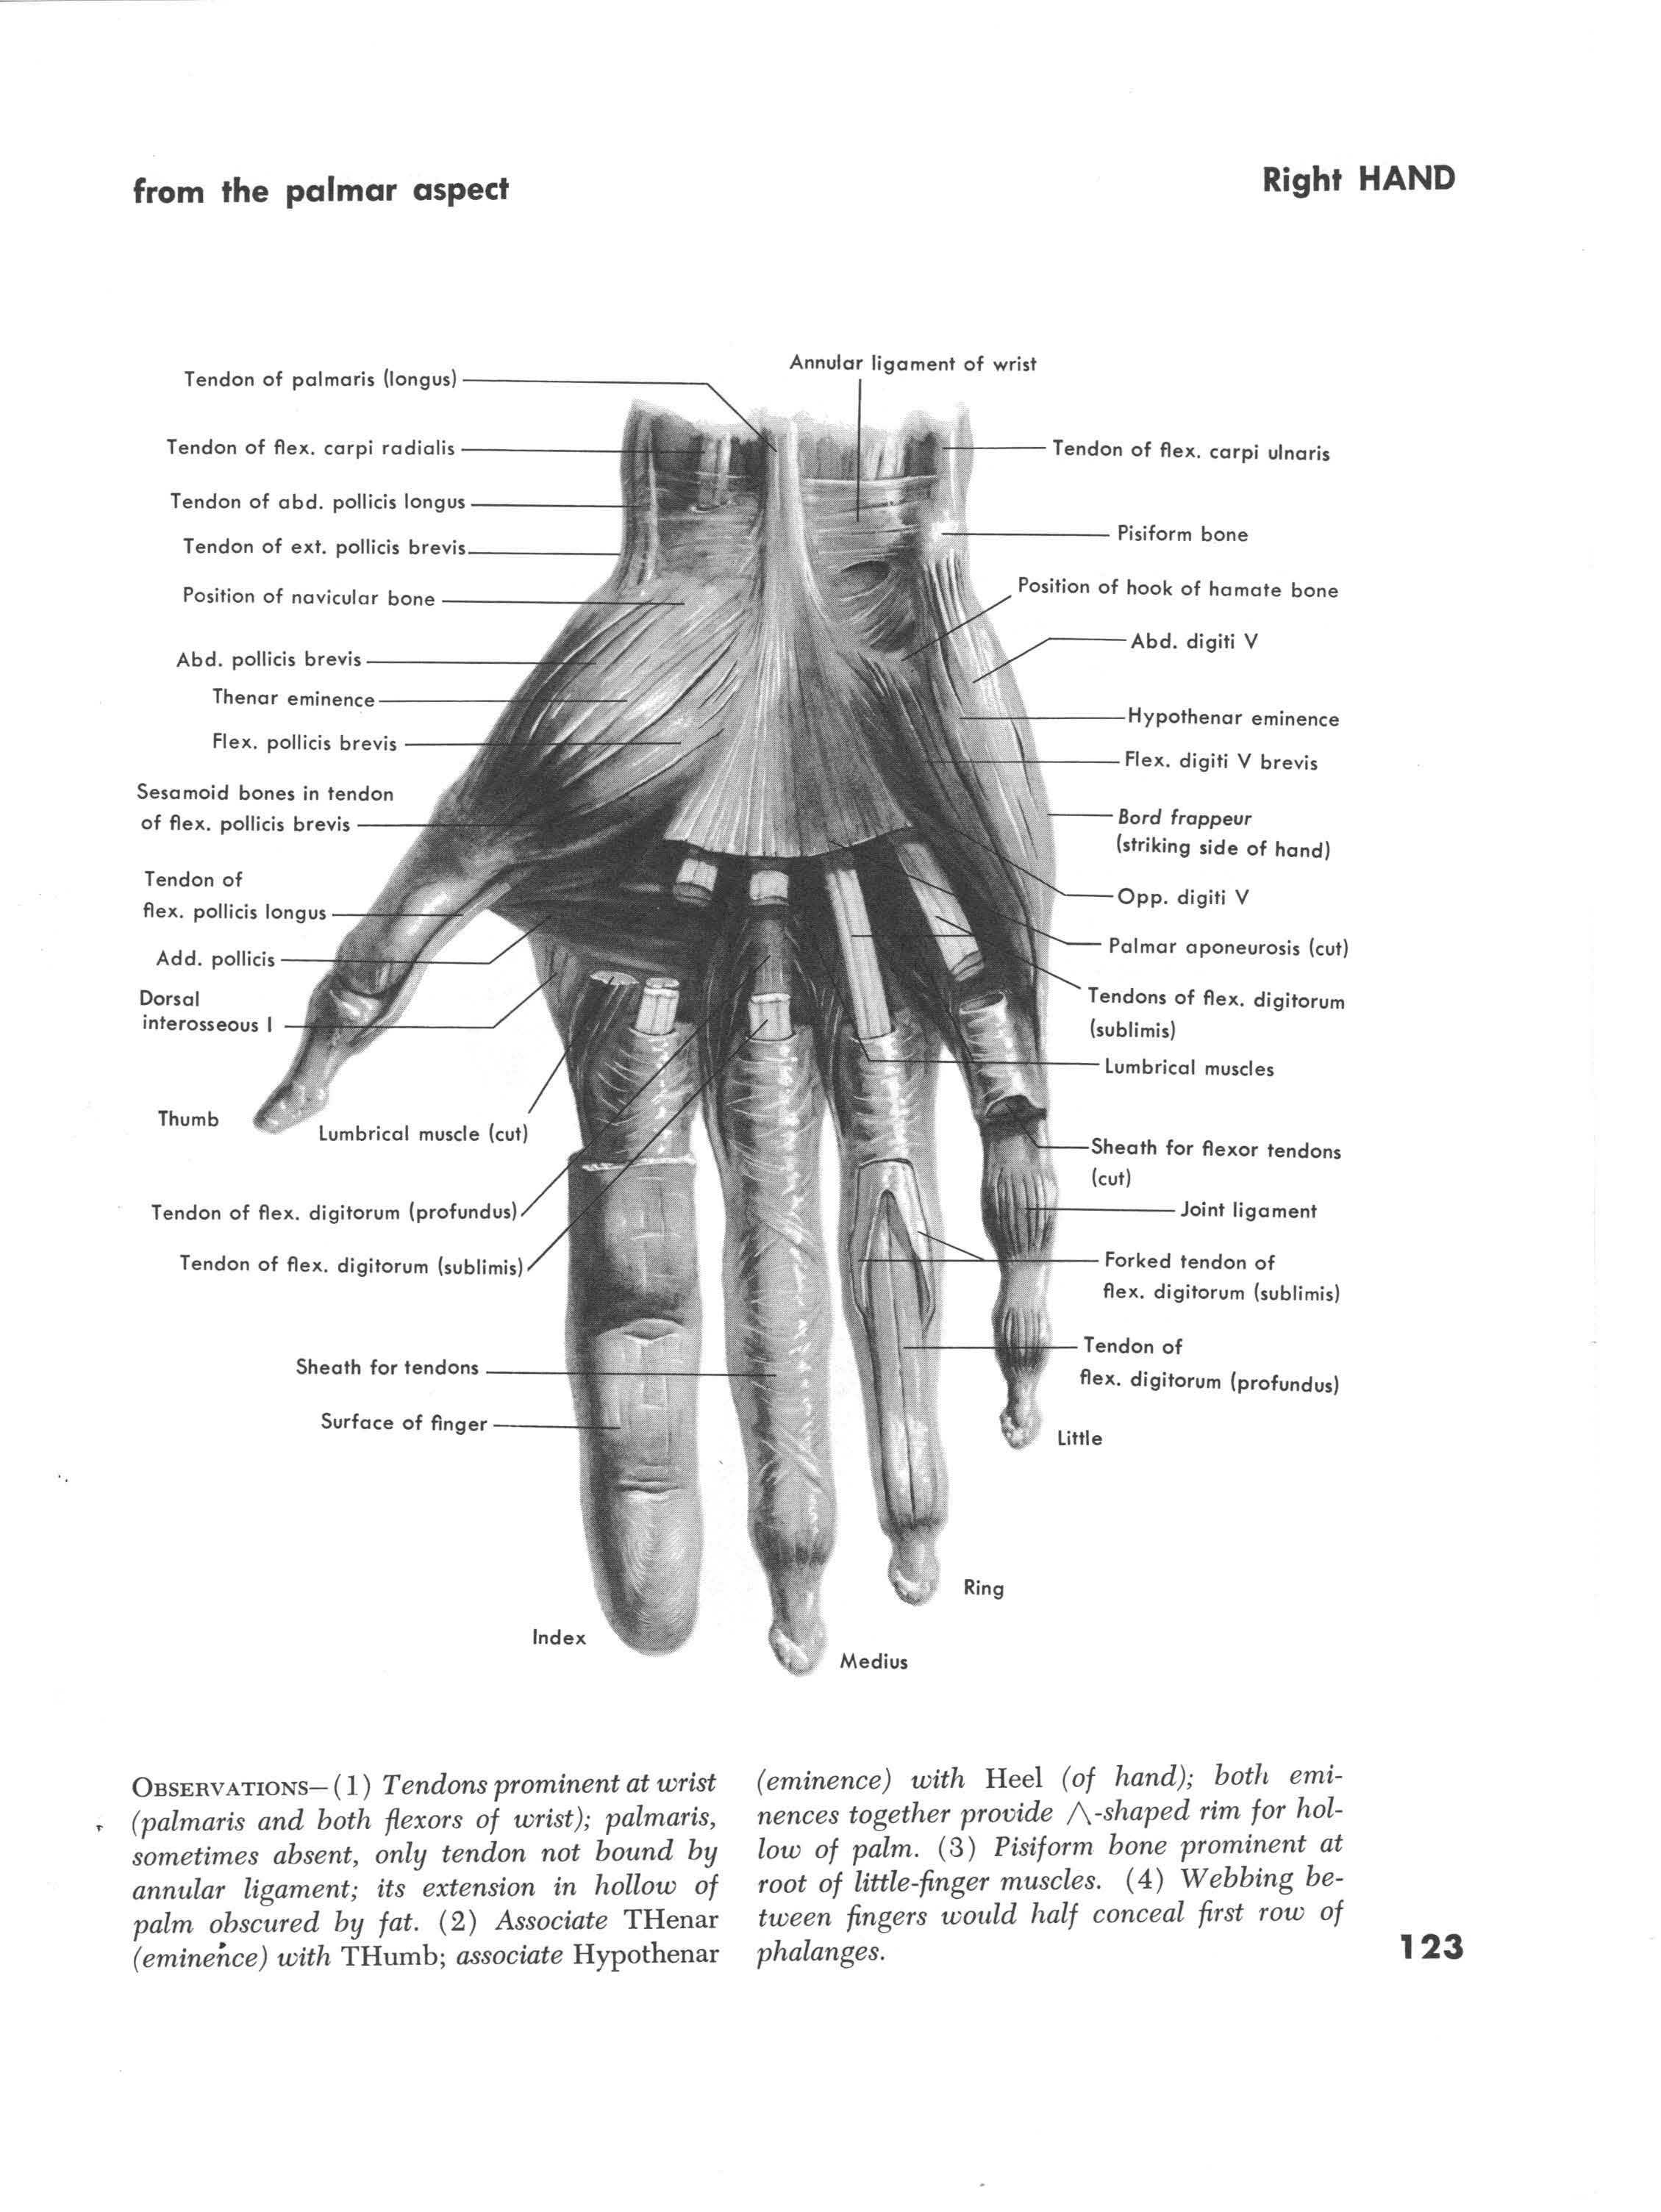 Muscles of the right hand back view